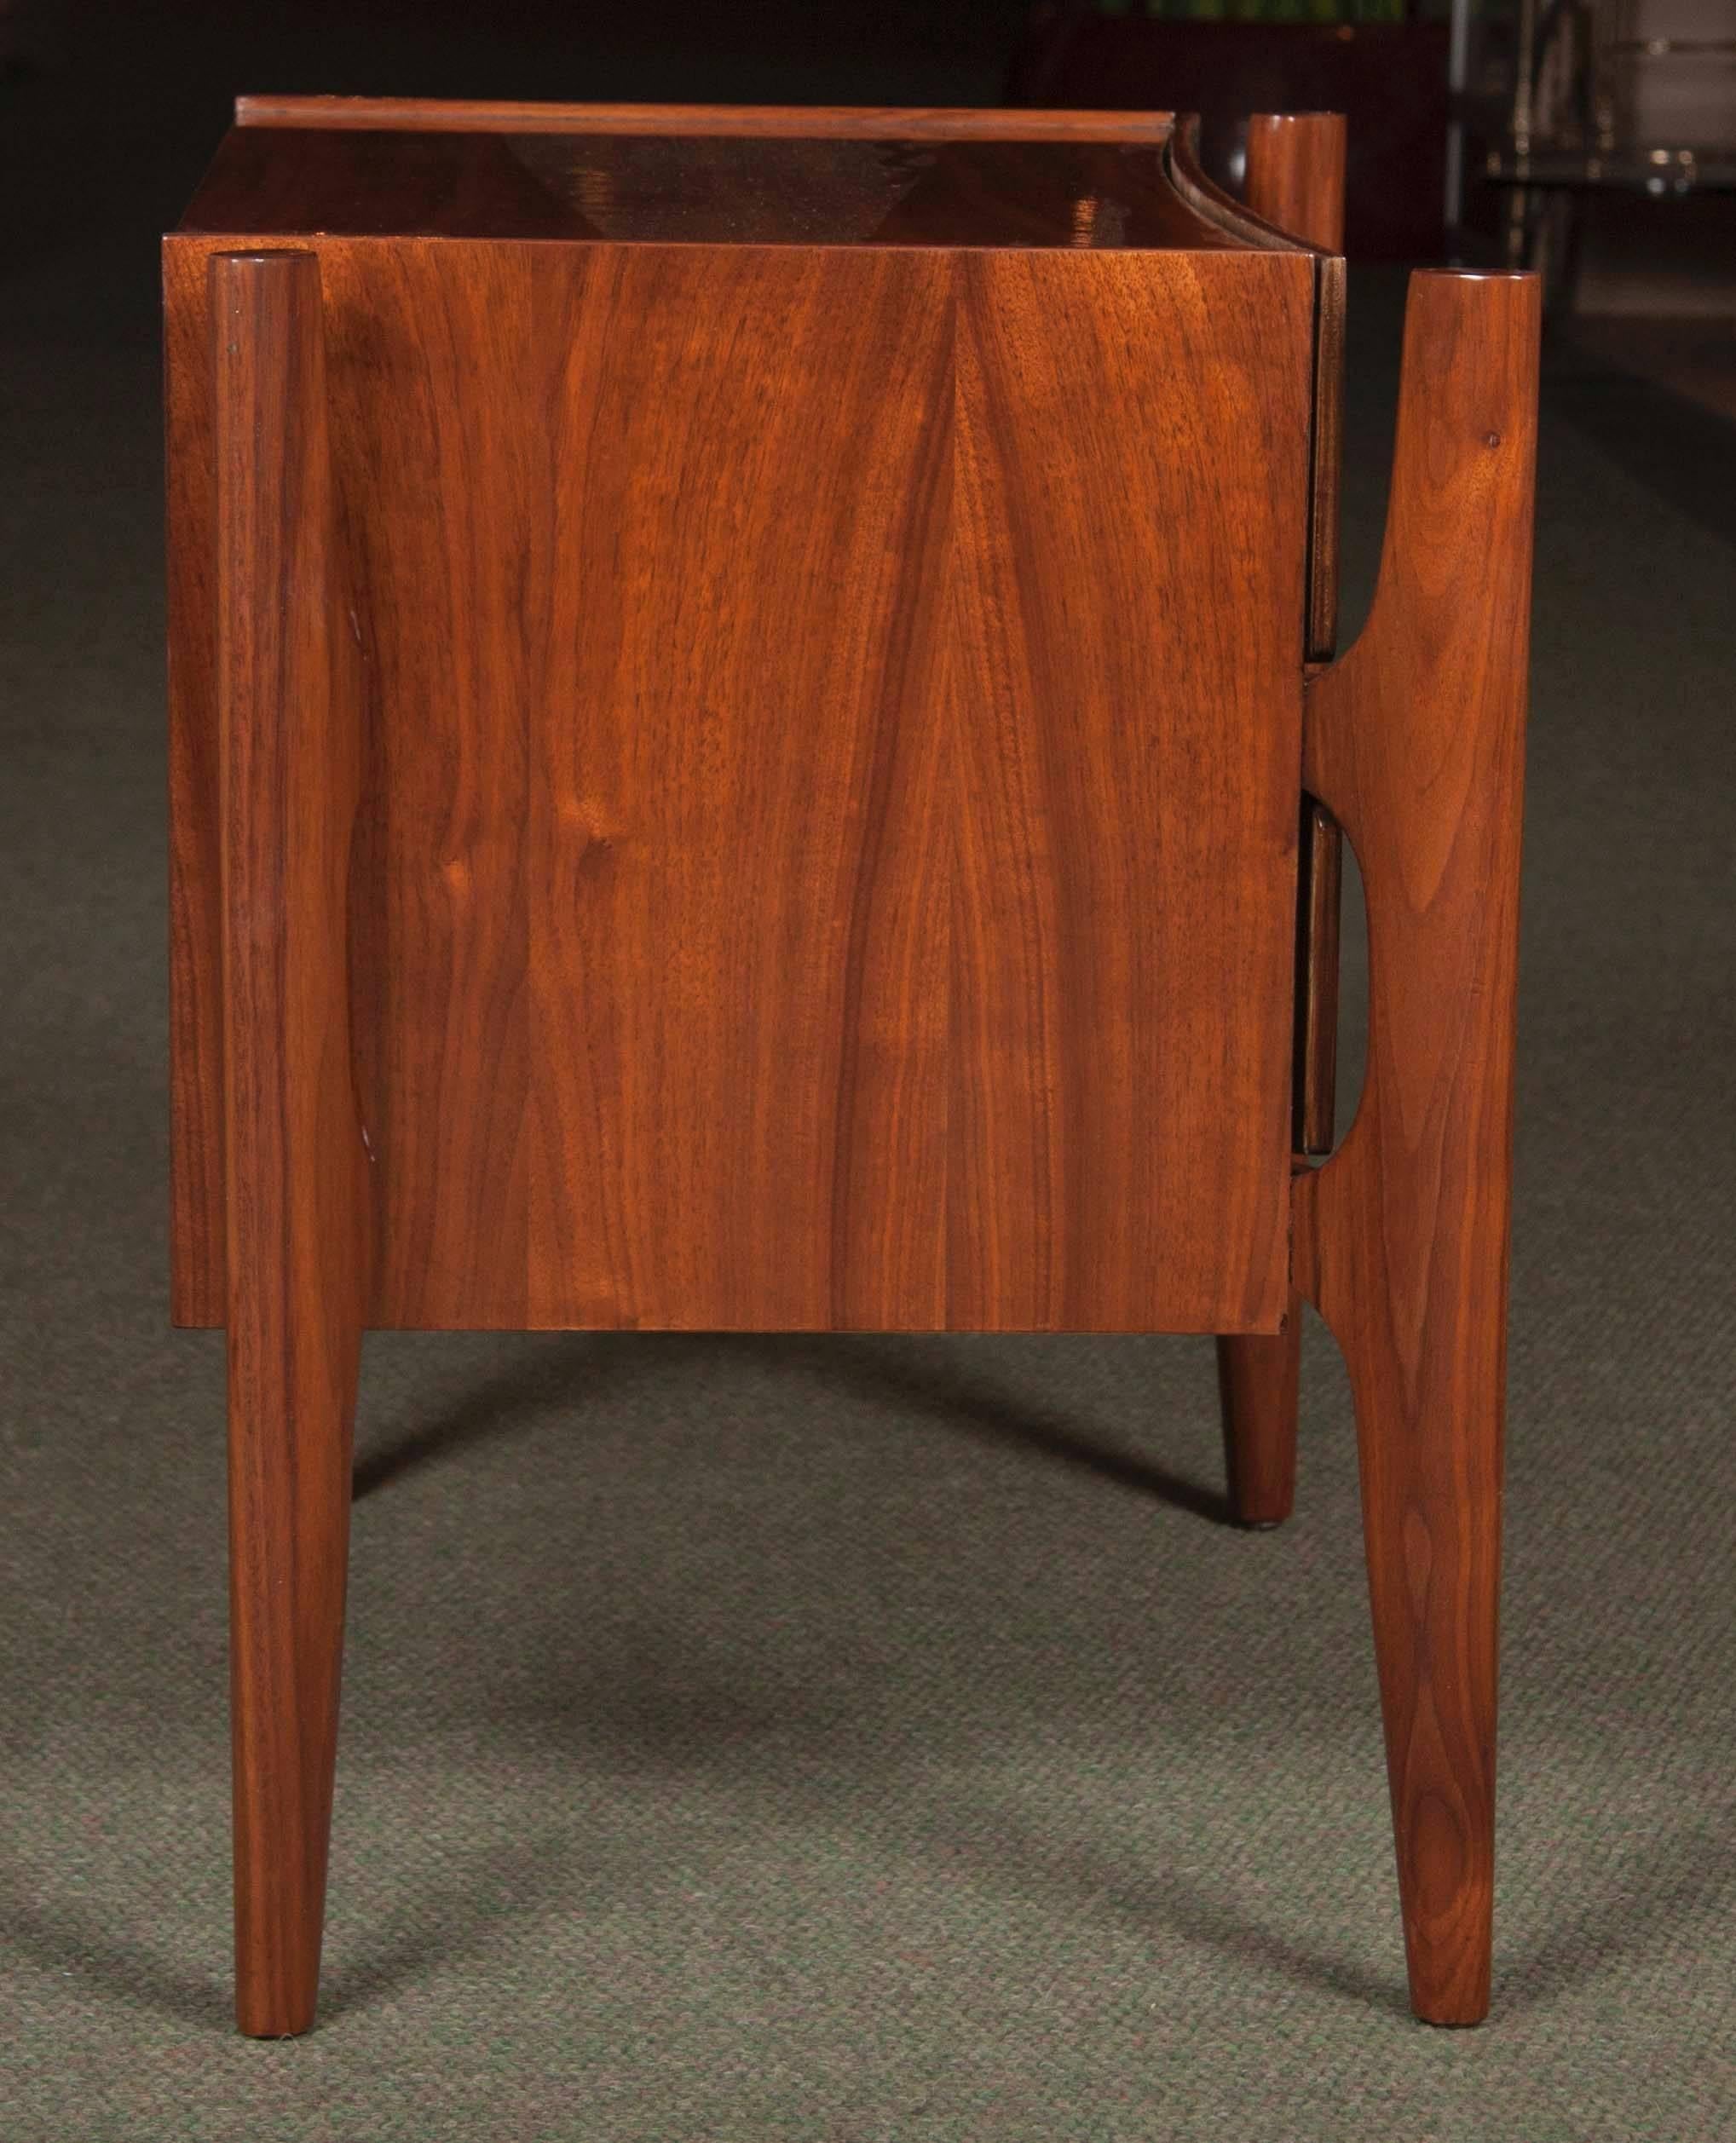 Walnut Pair of Bedside Tables by Edmond Spence